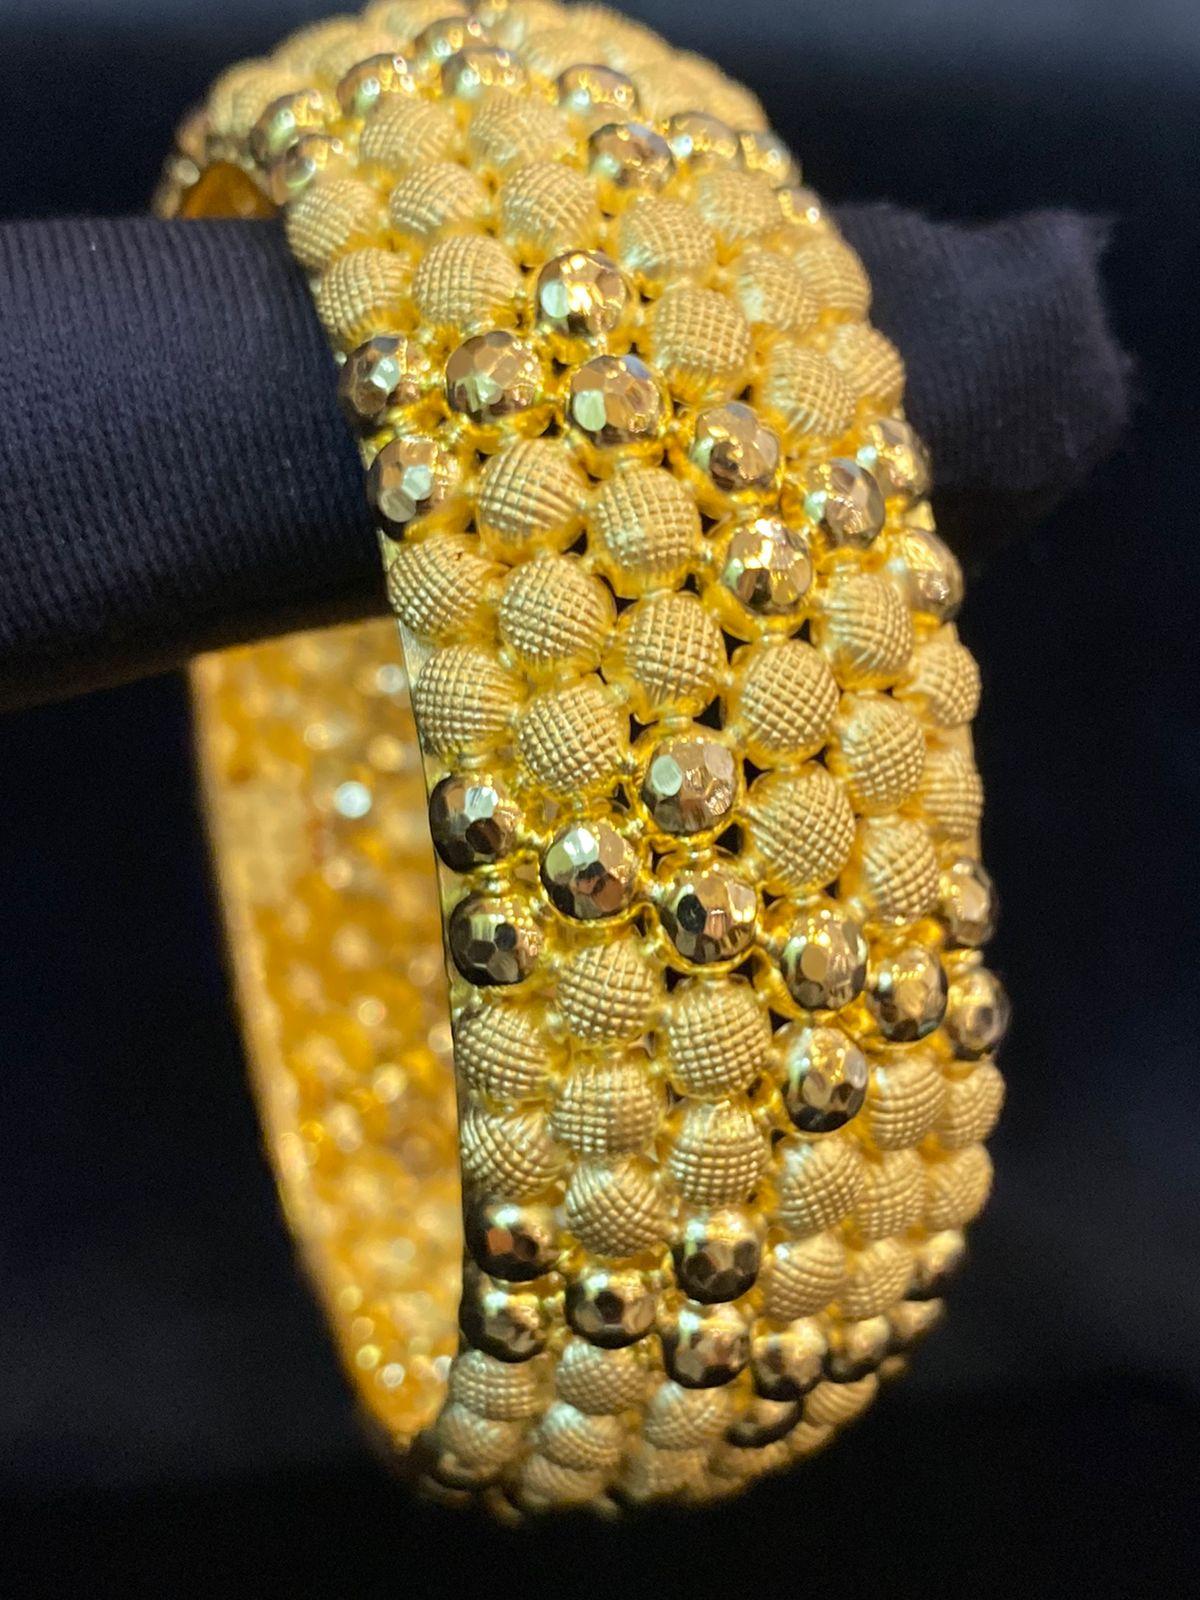 Very adorable design for this beautiful bracelet in 22k gold . 
Weight 30 grams. 
Handcrafted by artisan goldsmith.
Excellent manufacture and quality.
Circumference of 18 cm.